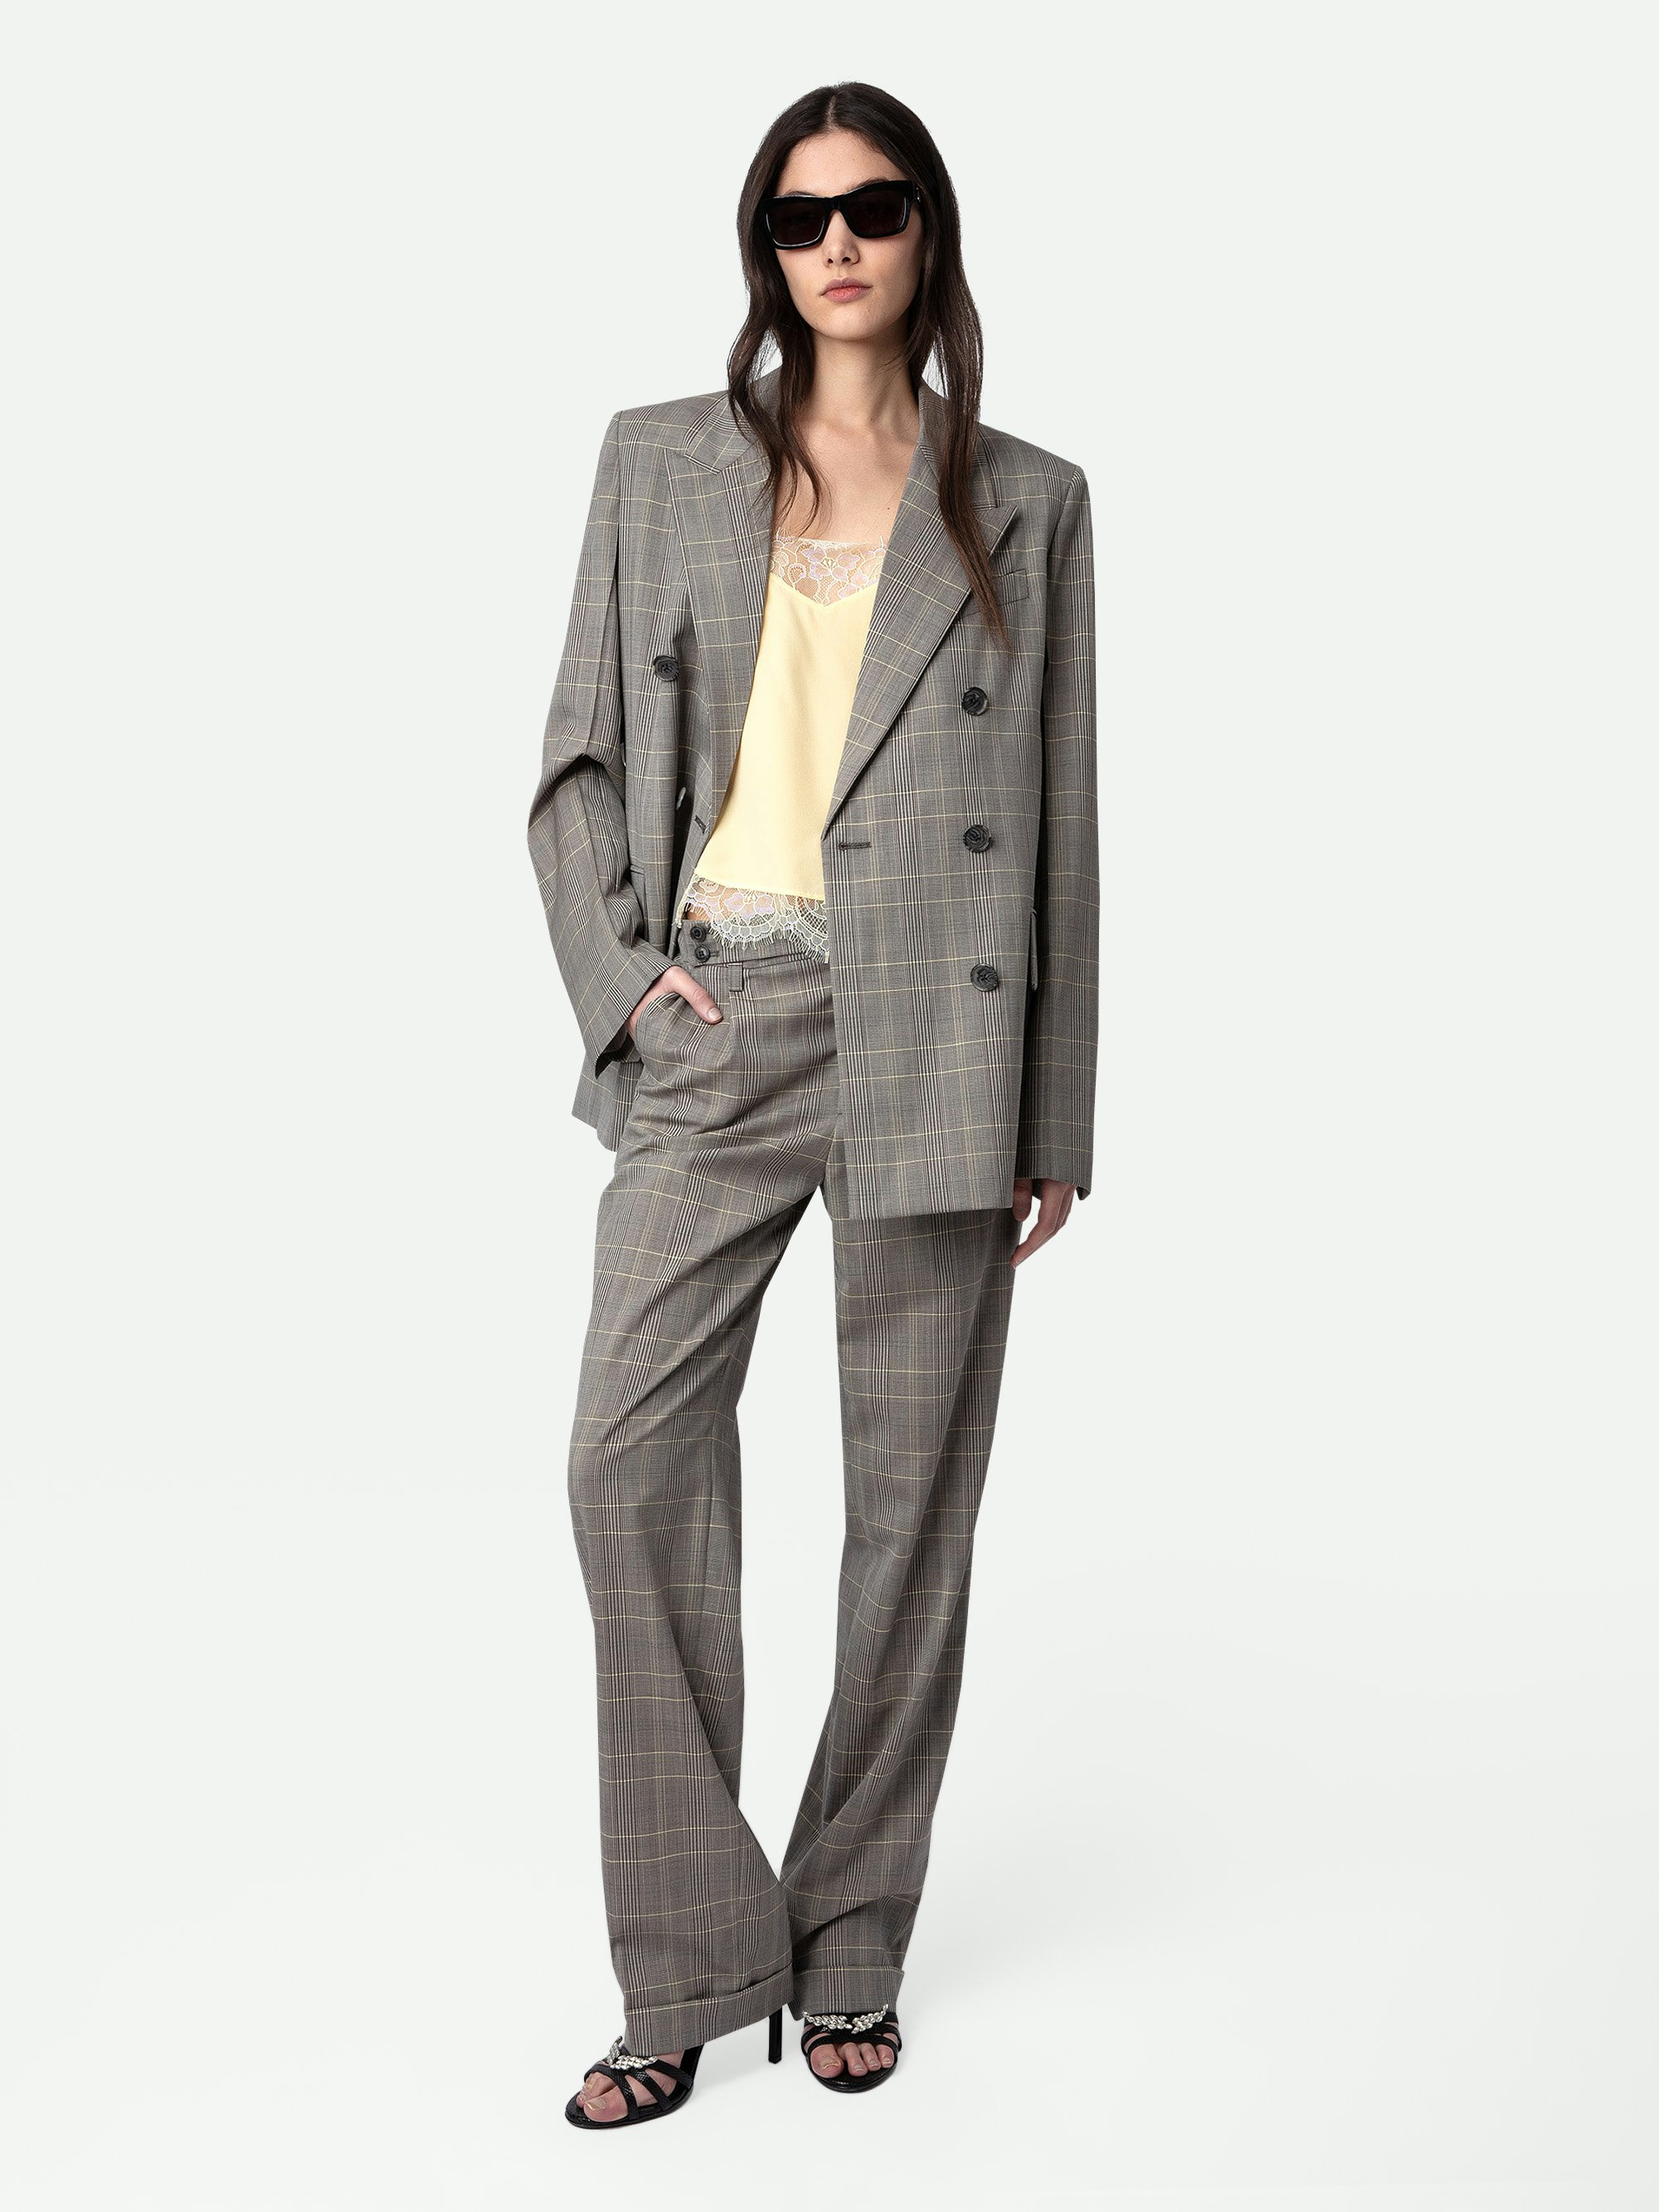 Pura Pants - Checked grey wool tailored pants with pockets.